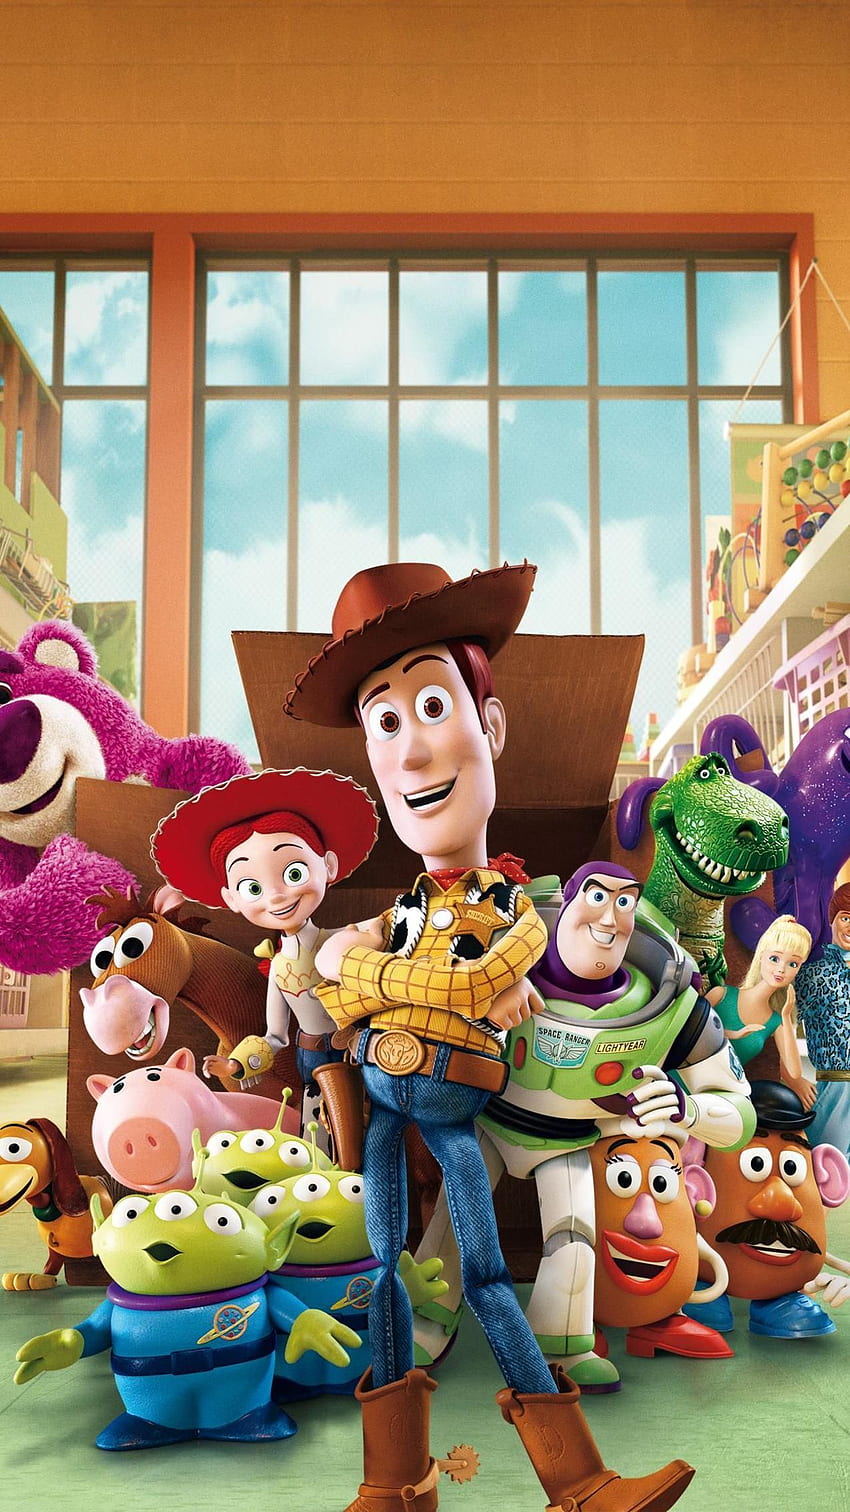 Toy Story 3 (2010) Phone . Moviemania. Toy story 3 movie, Toy story 3, Cute disney HD phone wallpaper